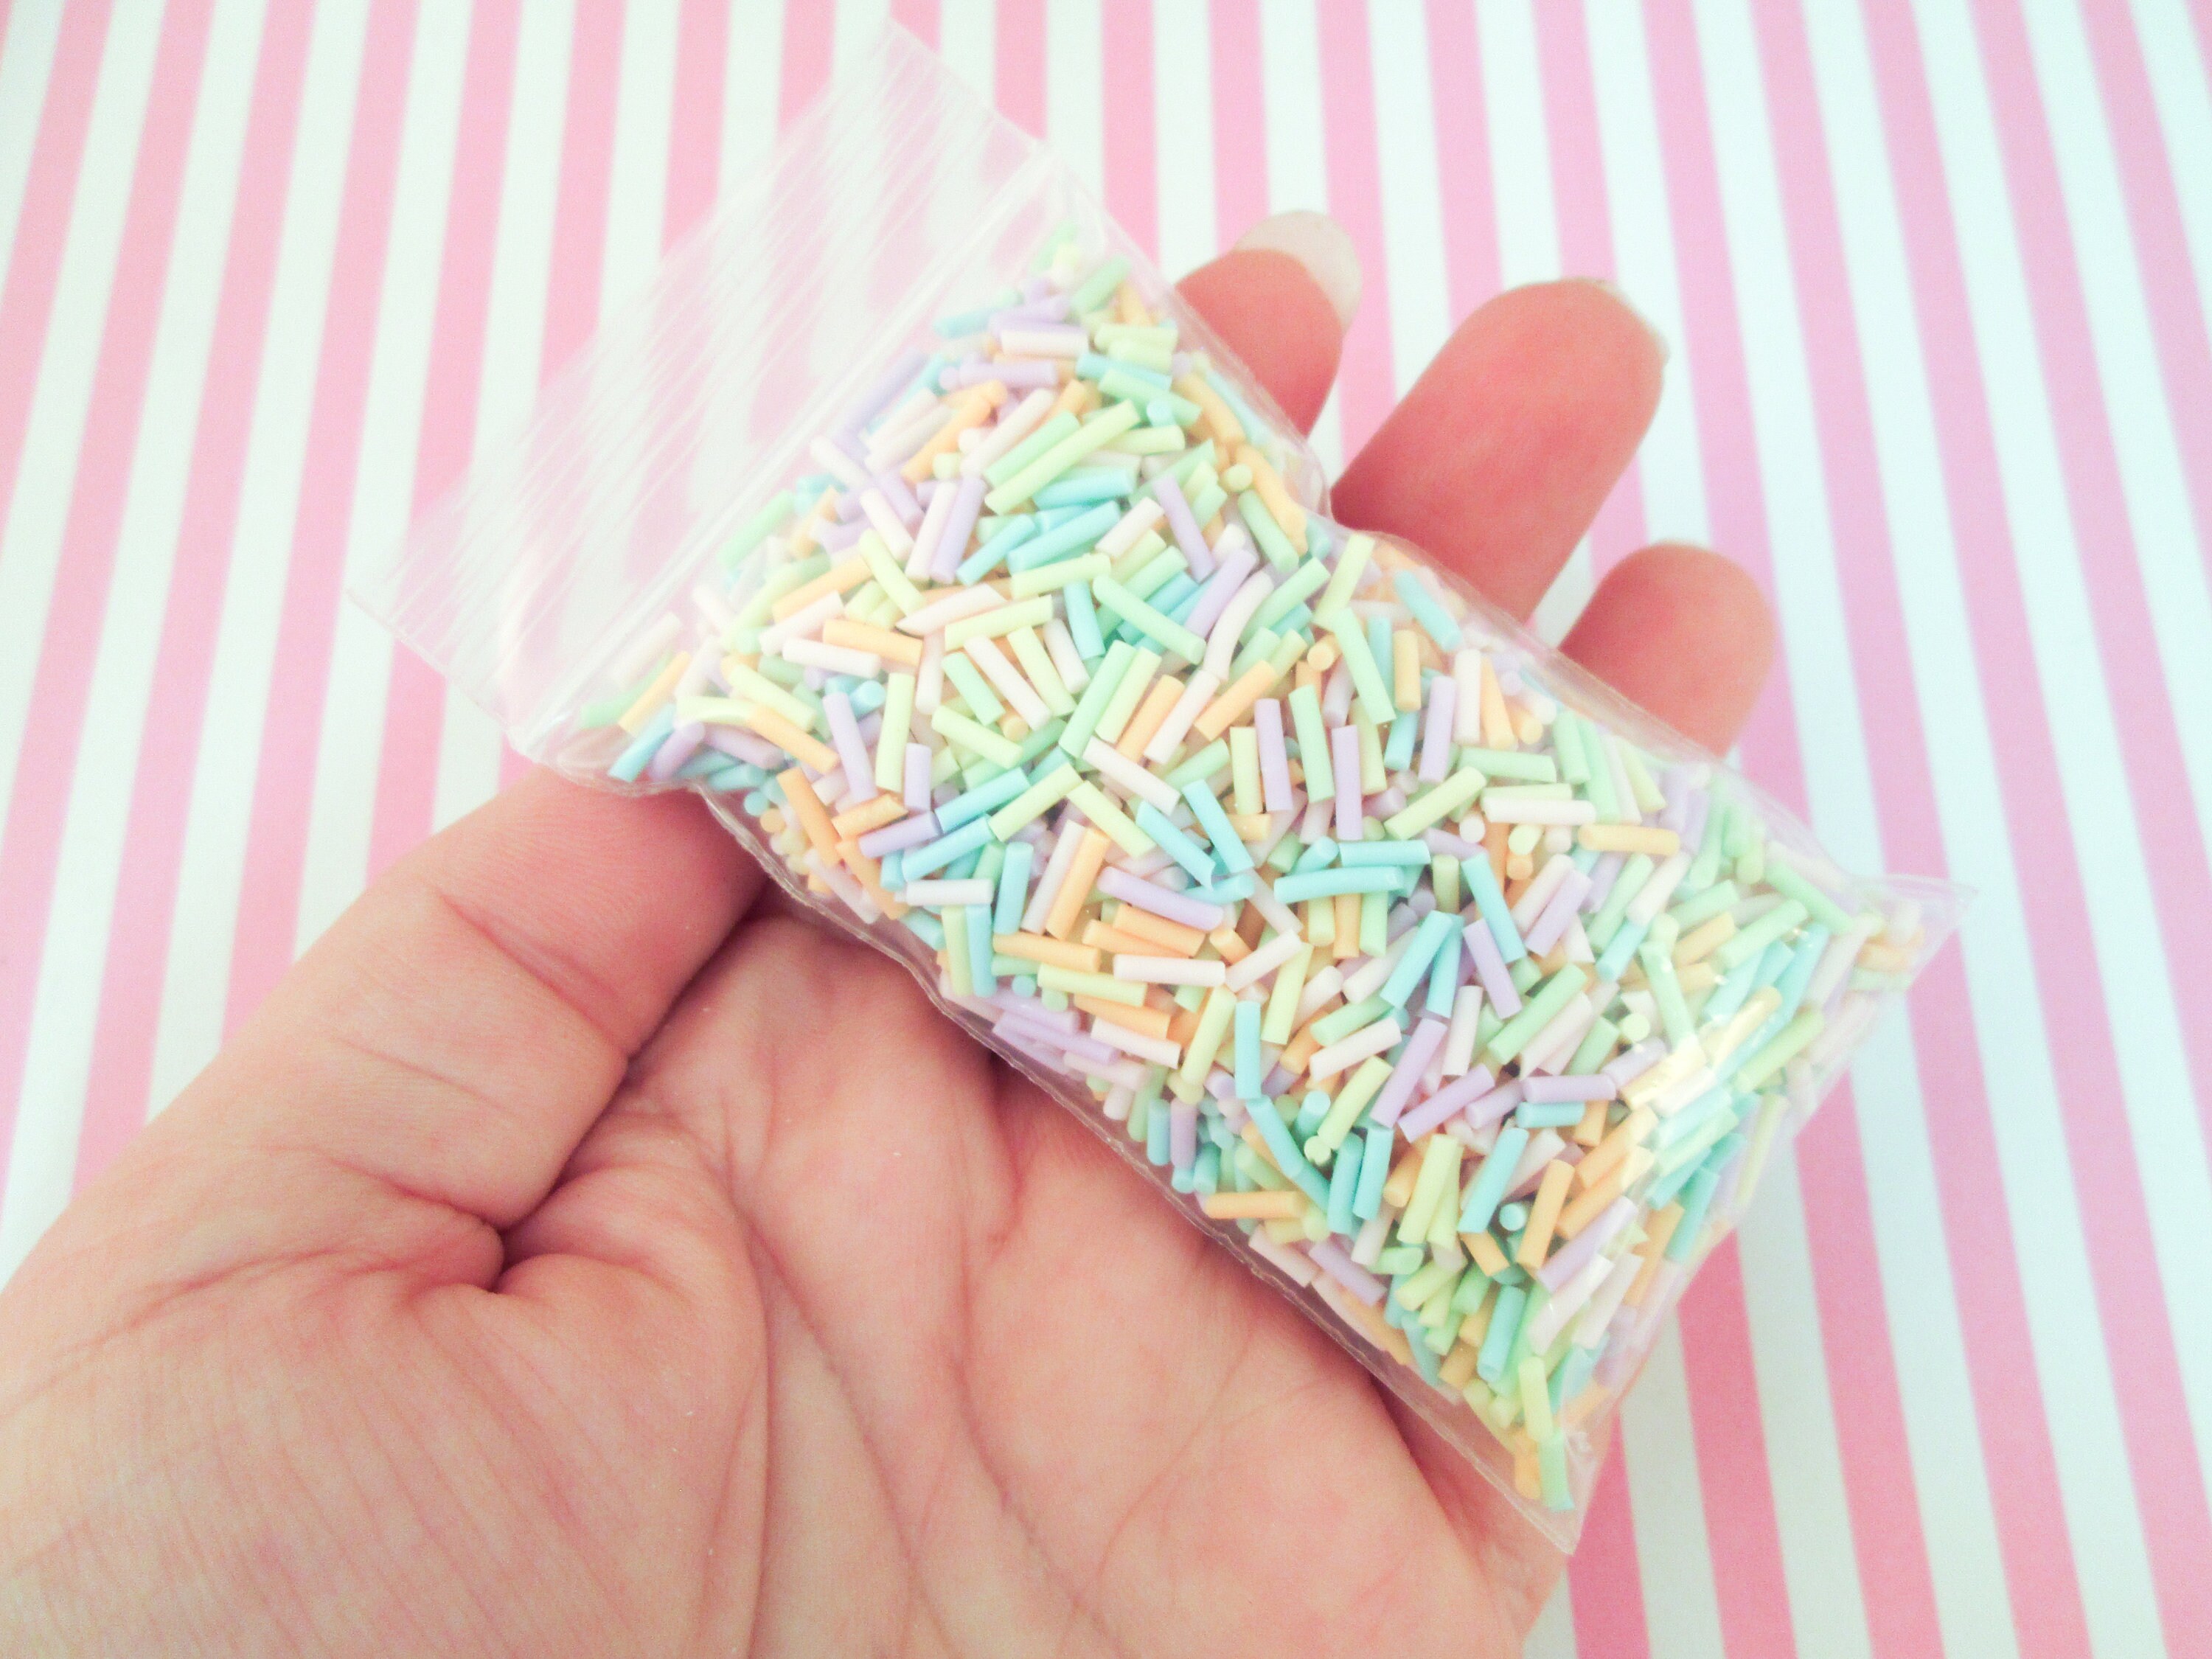  15 Gram Bag Peaches and Cream Non Edible cET Polymer Clay  inedible Sprinkle Mix, Spring Sweets Themed Polymer Clay Fake Sprinkles,  Decoden Jimmies : Grocery & Gourmet Food